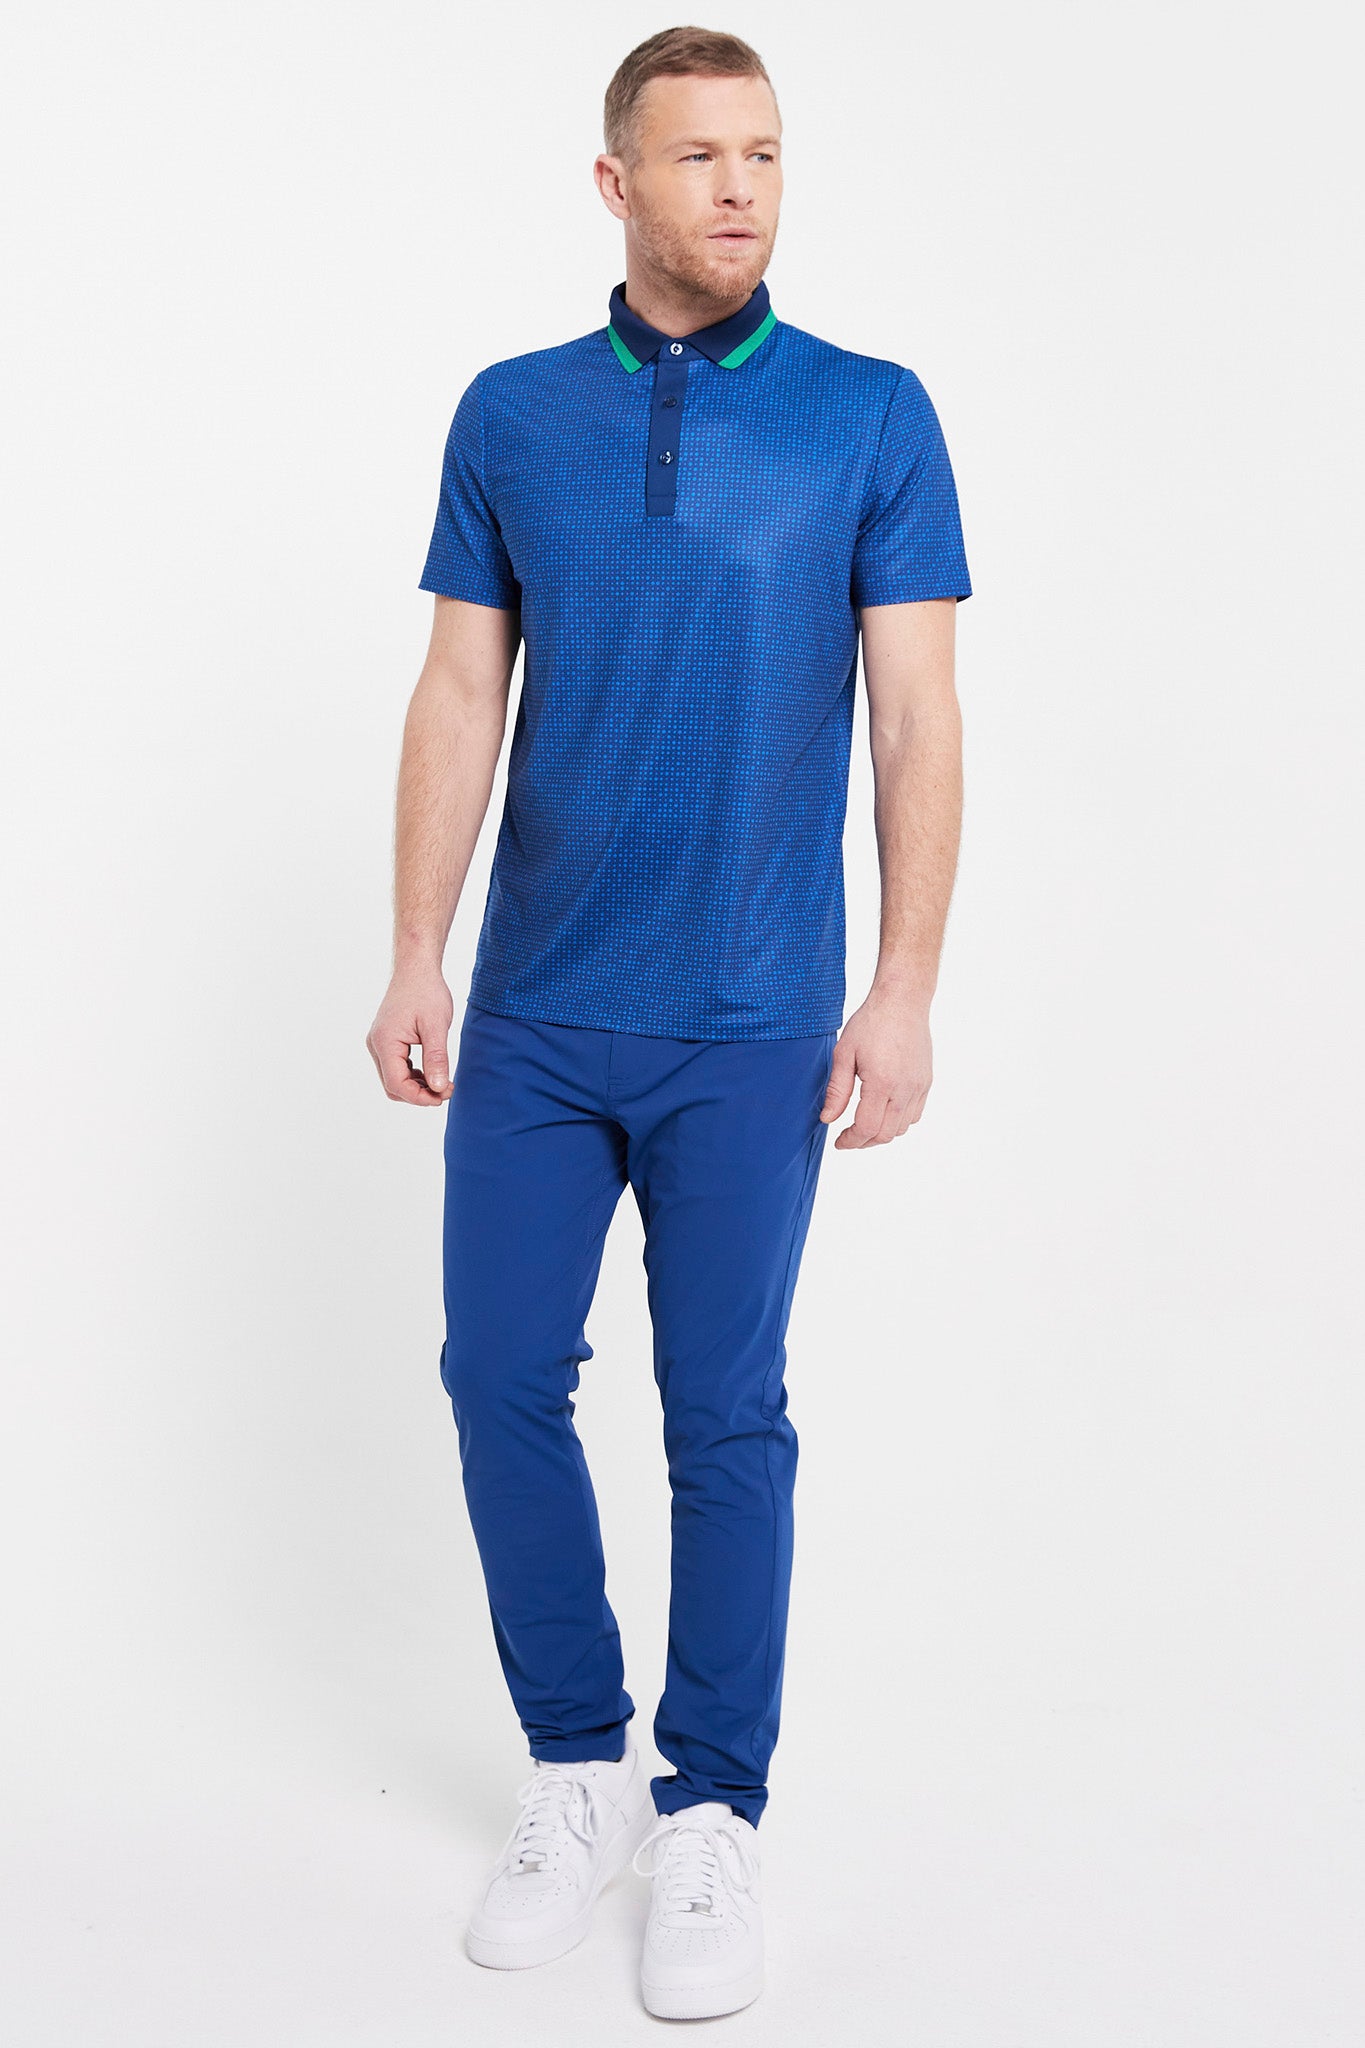 Hewes Polo in Classic Blue & Cobalt